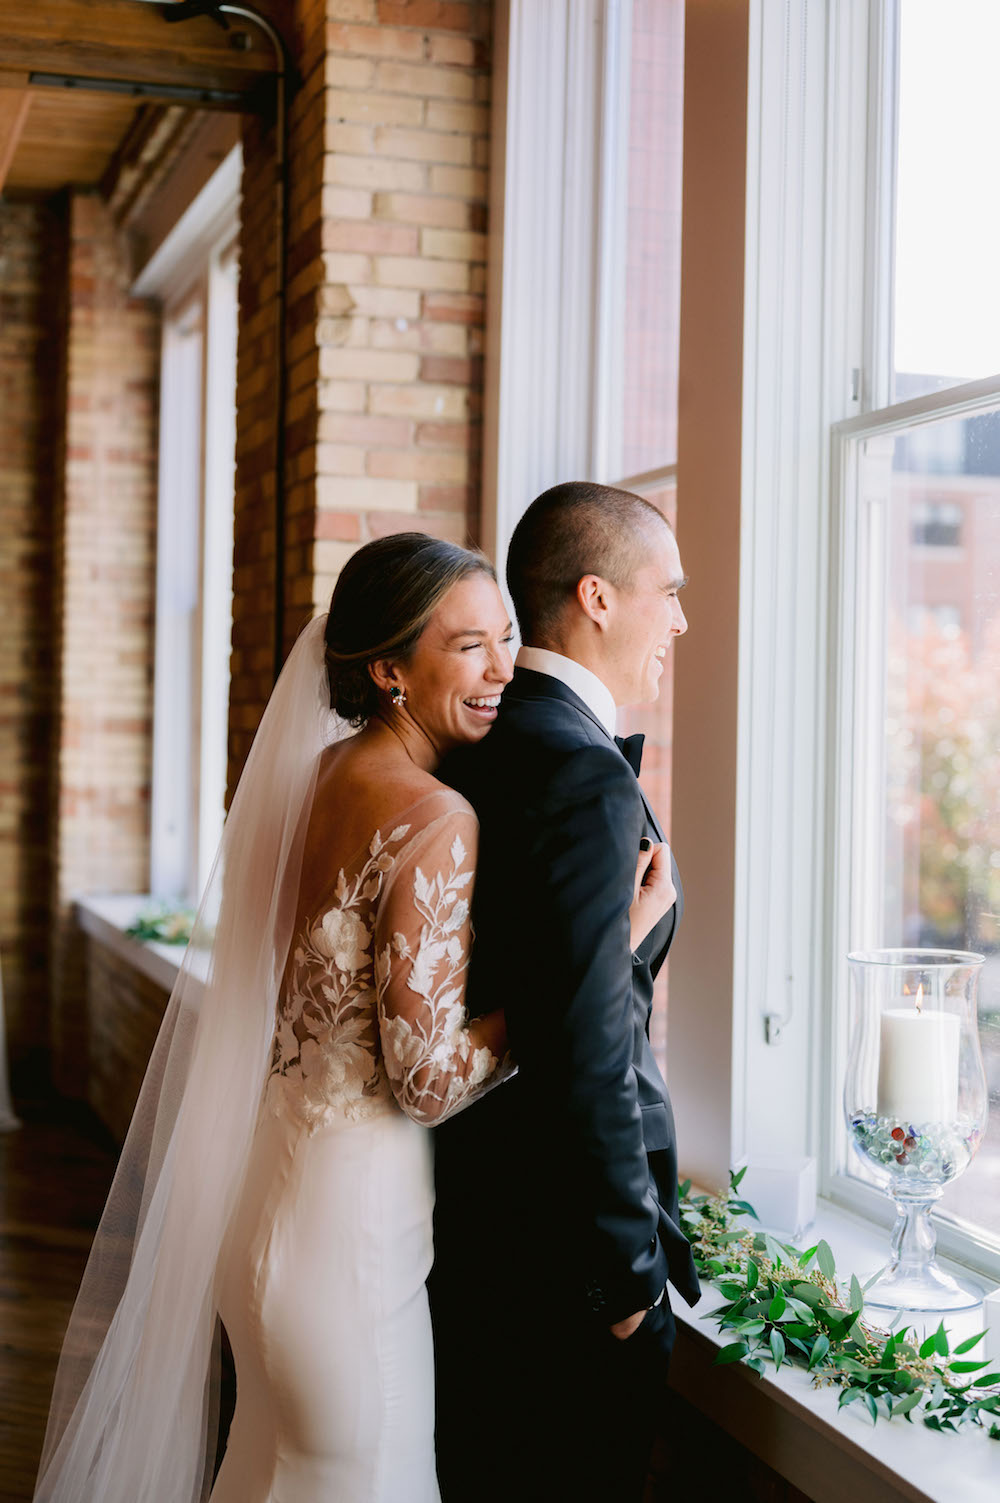 Bride smiles as she wraps her arms around the groom looking out the window at the Loft at Luna, taken by Mary Shelton Media